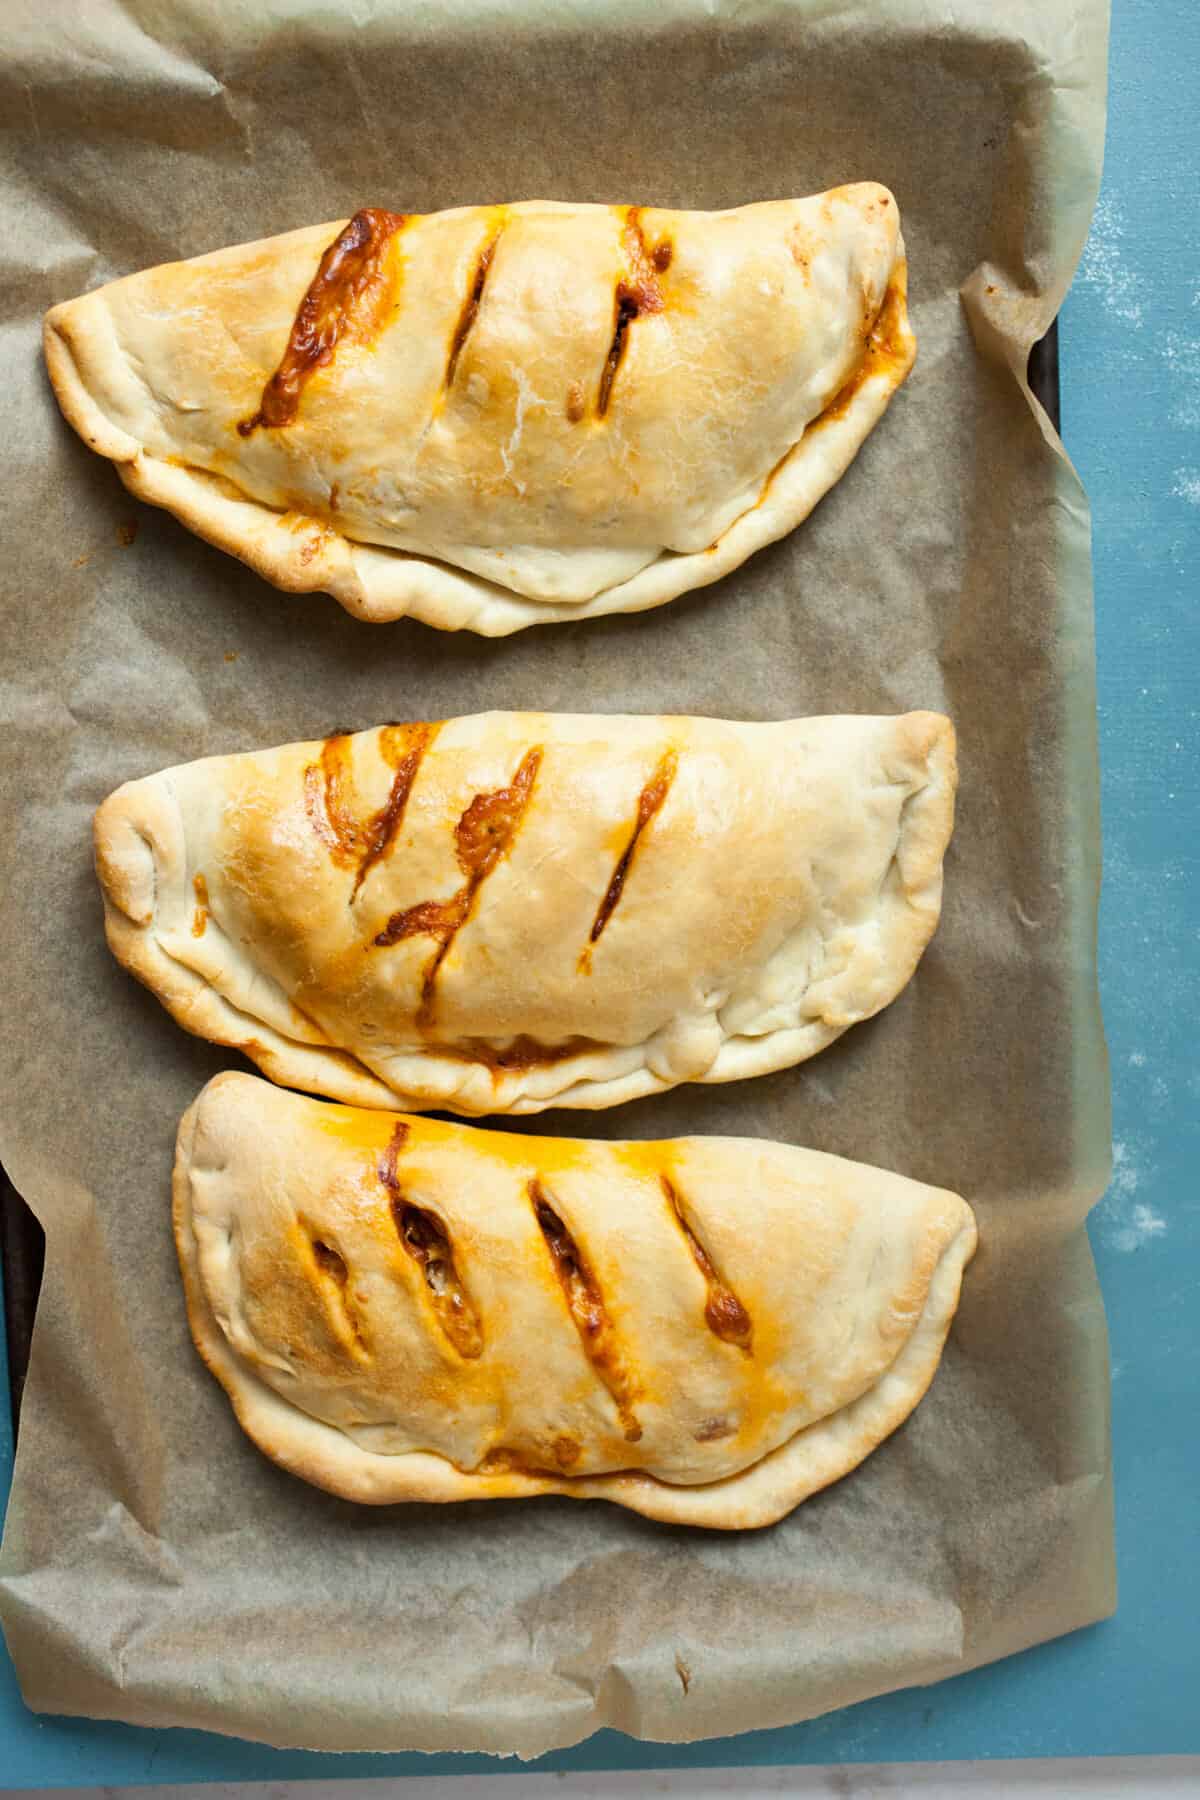 Sausage and Pepper Hot Pockets: These delicious homemade hot pockets are stuffed to the max with sausage, peppers, and cheese. They freeze perfectly as well and make for quick meals whenever you need one! | macheesmo.com